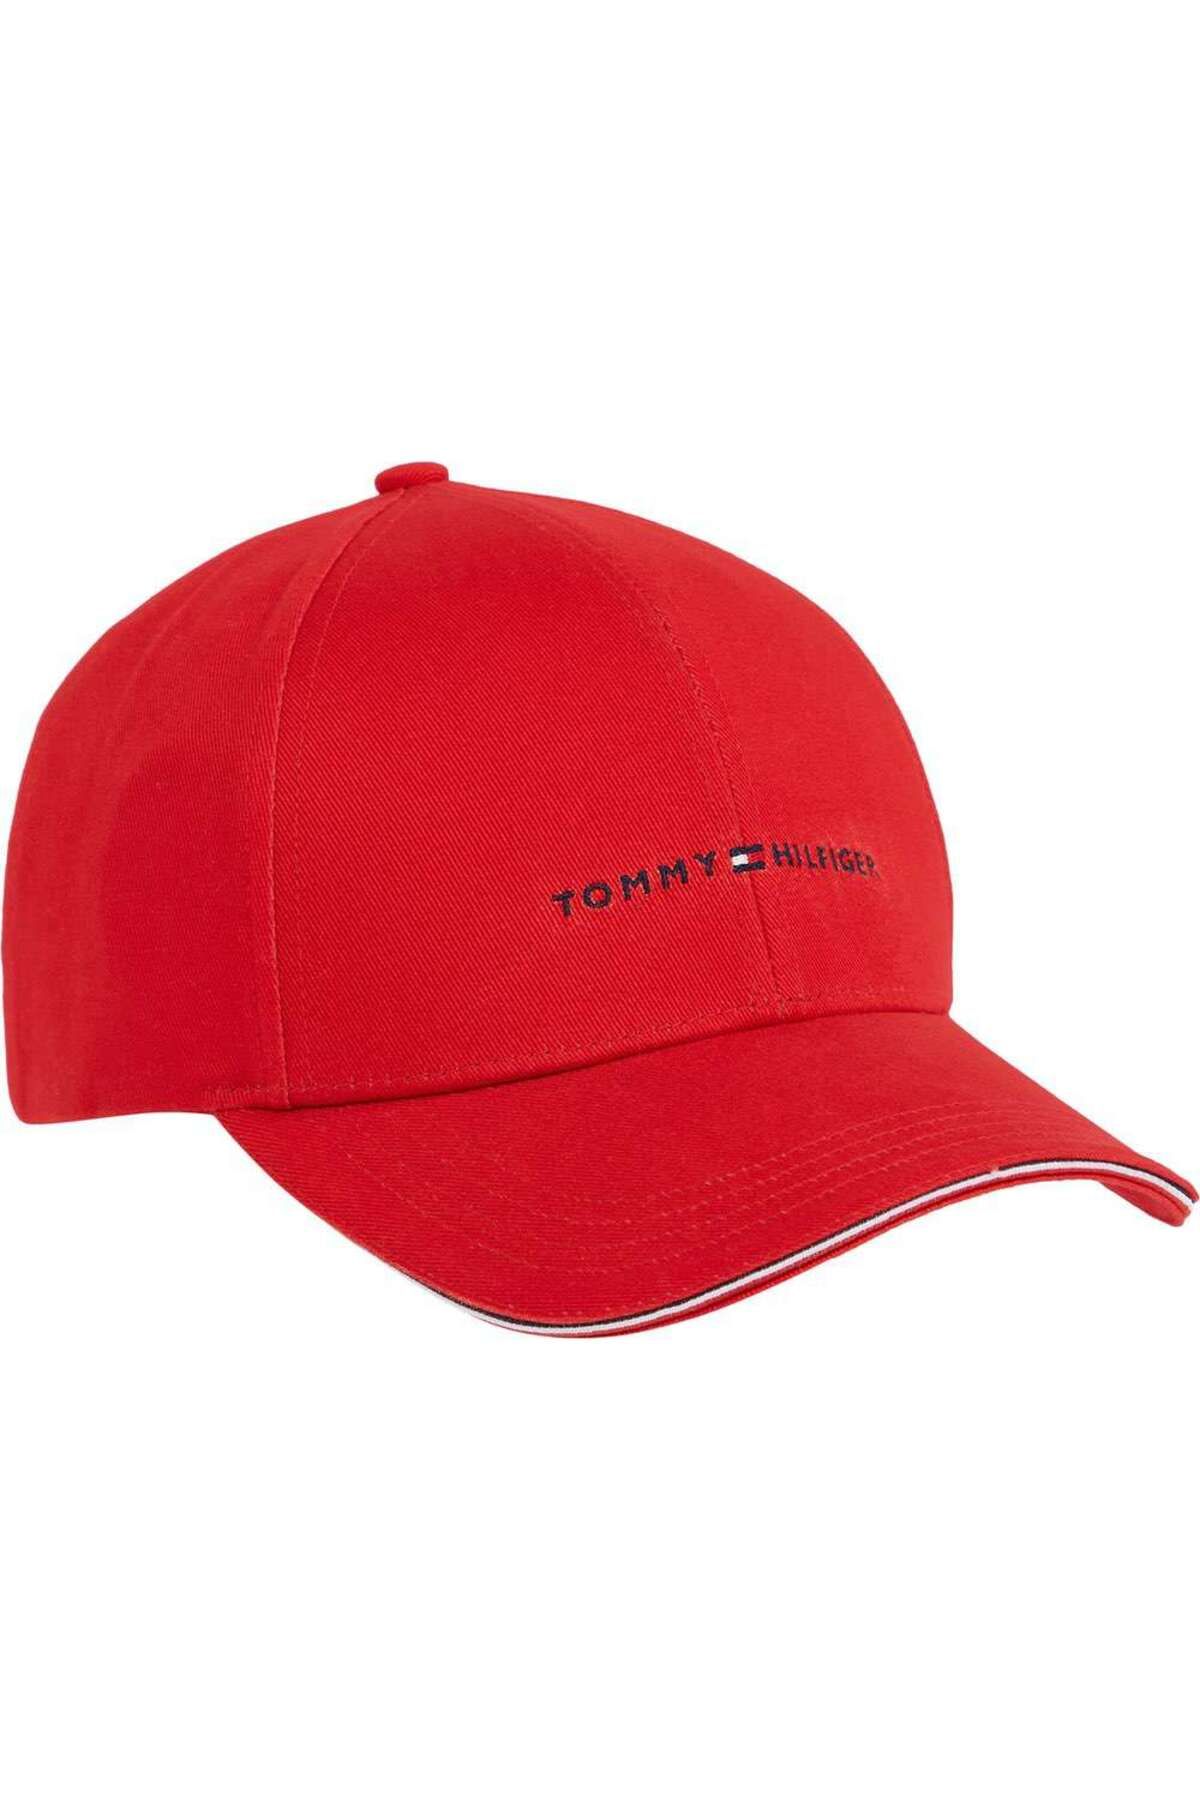 Tommy Hilfiger Th Corporate Cap